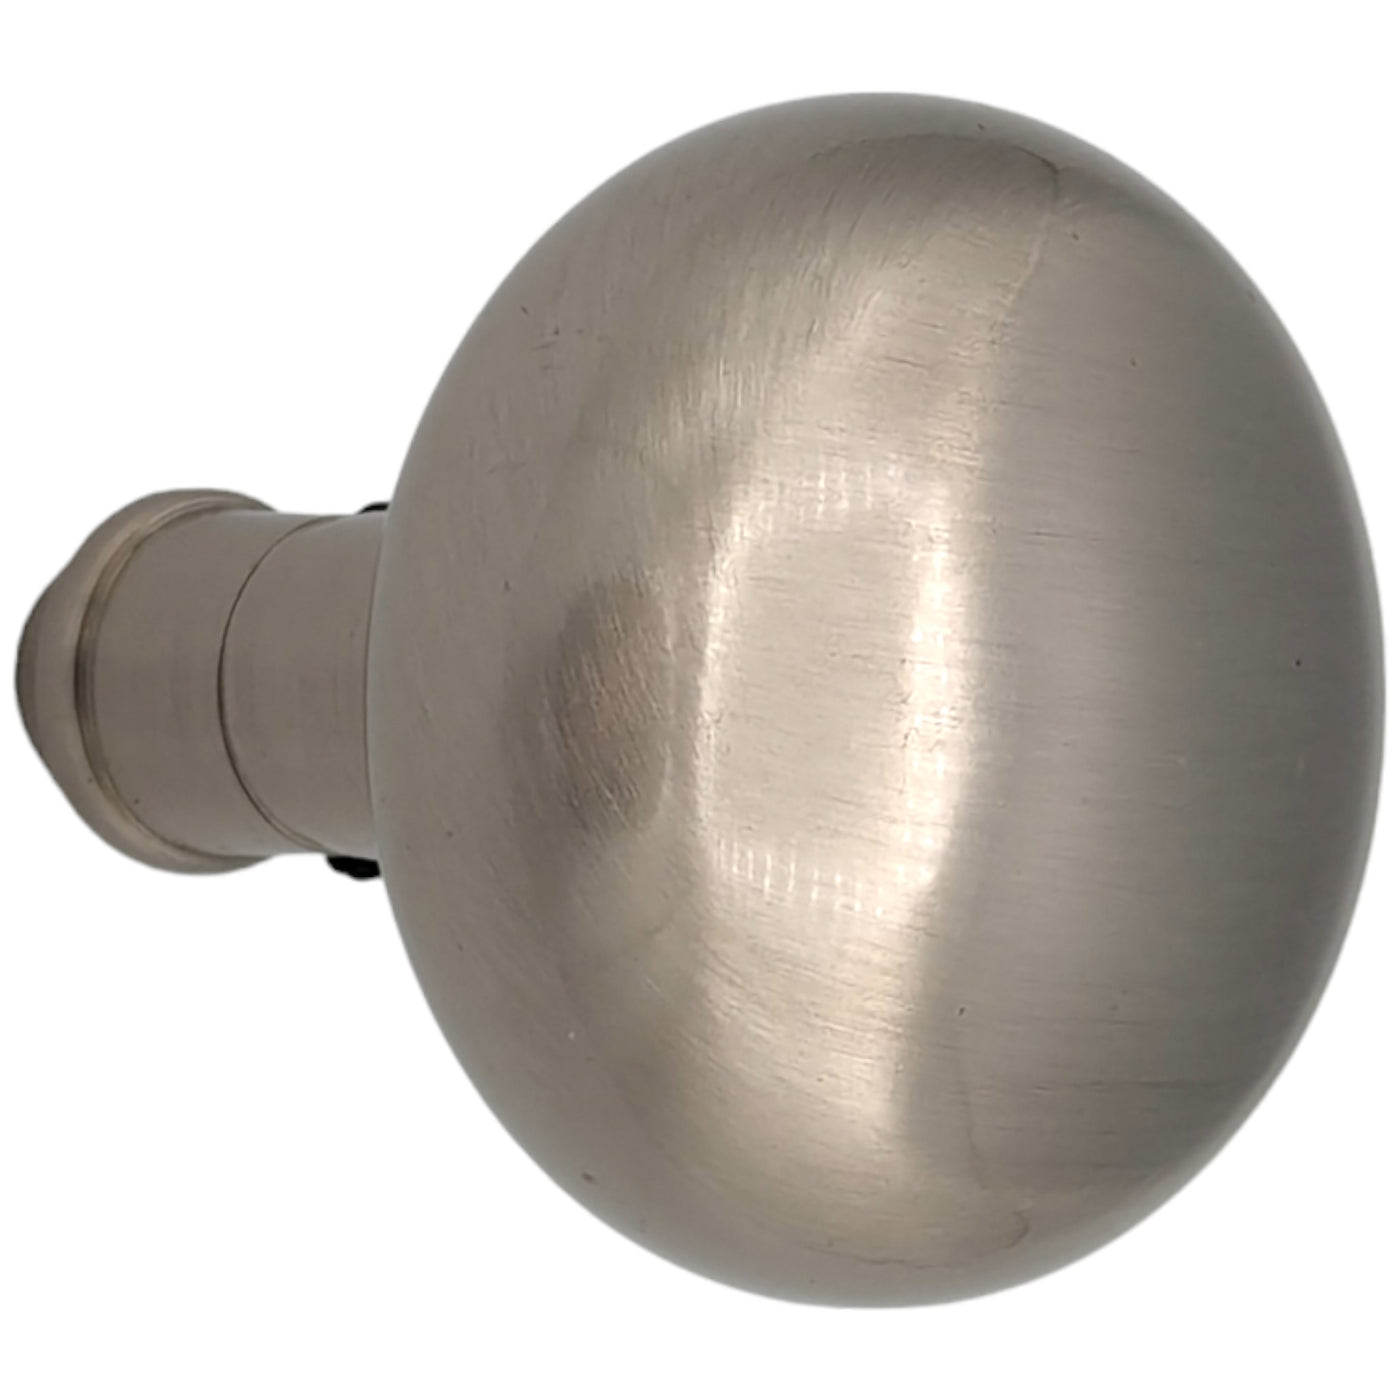 Round Solid Brass Spare Door Knob Set (Several Finishes Available)